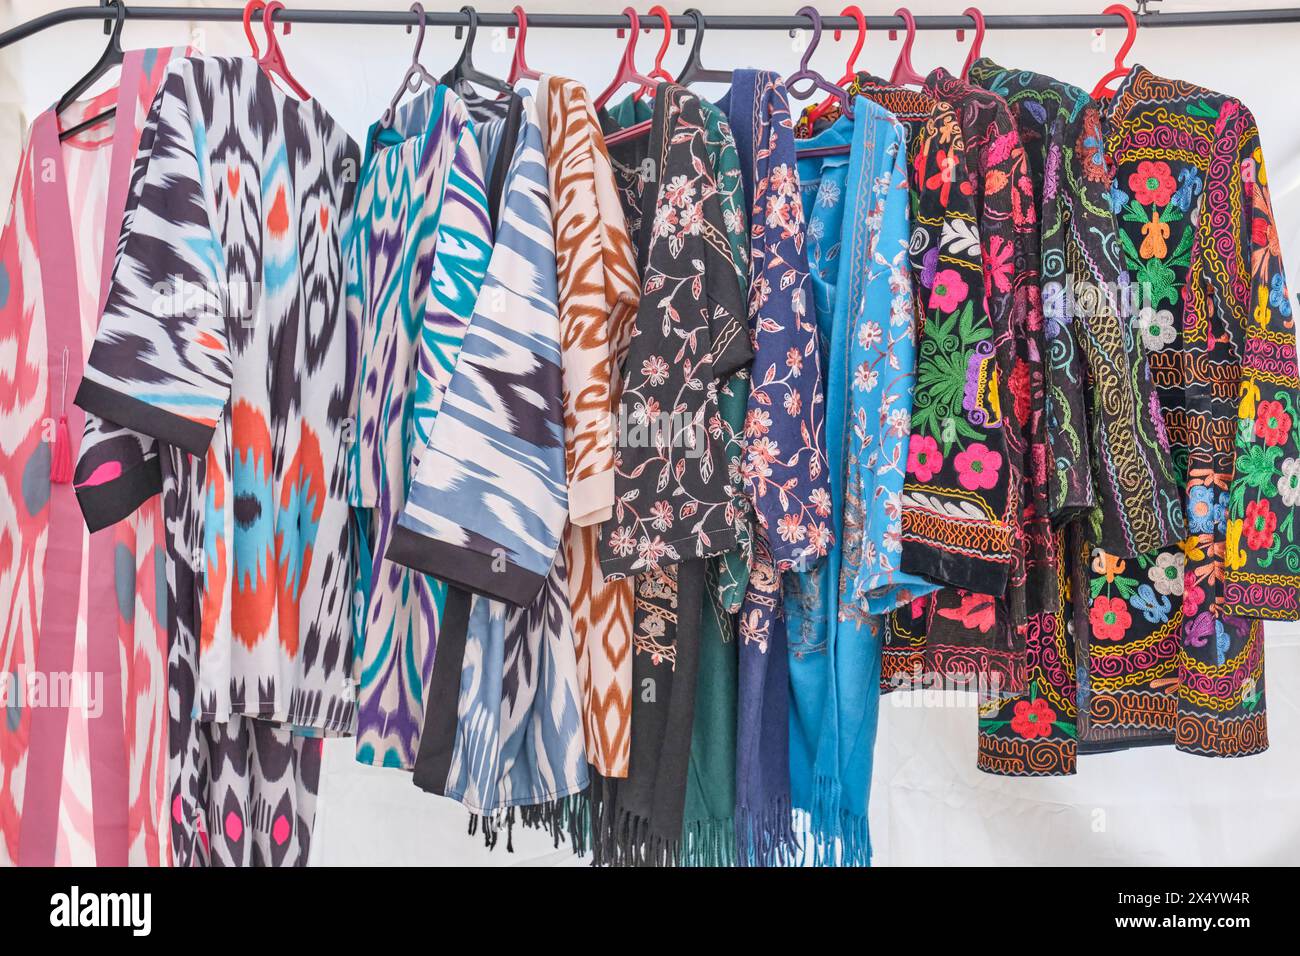 Women's Central Asian robes with traditional patterns and colorful embroidery on hangers in a row in a sales tent. Crafts fair on a pedestrian street, Stock Photo